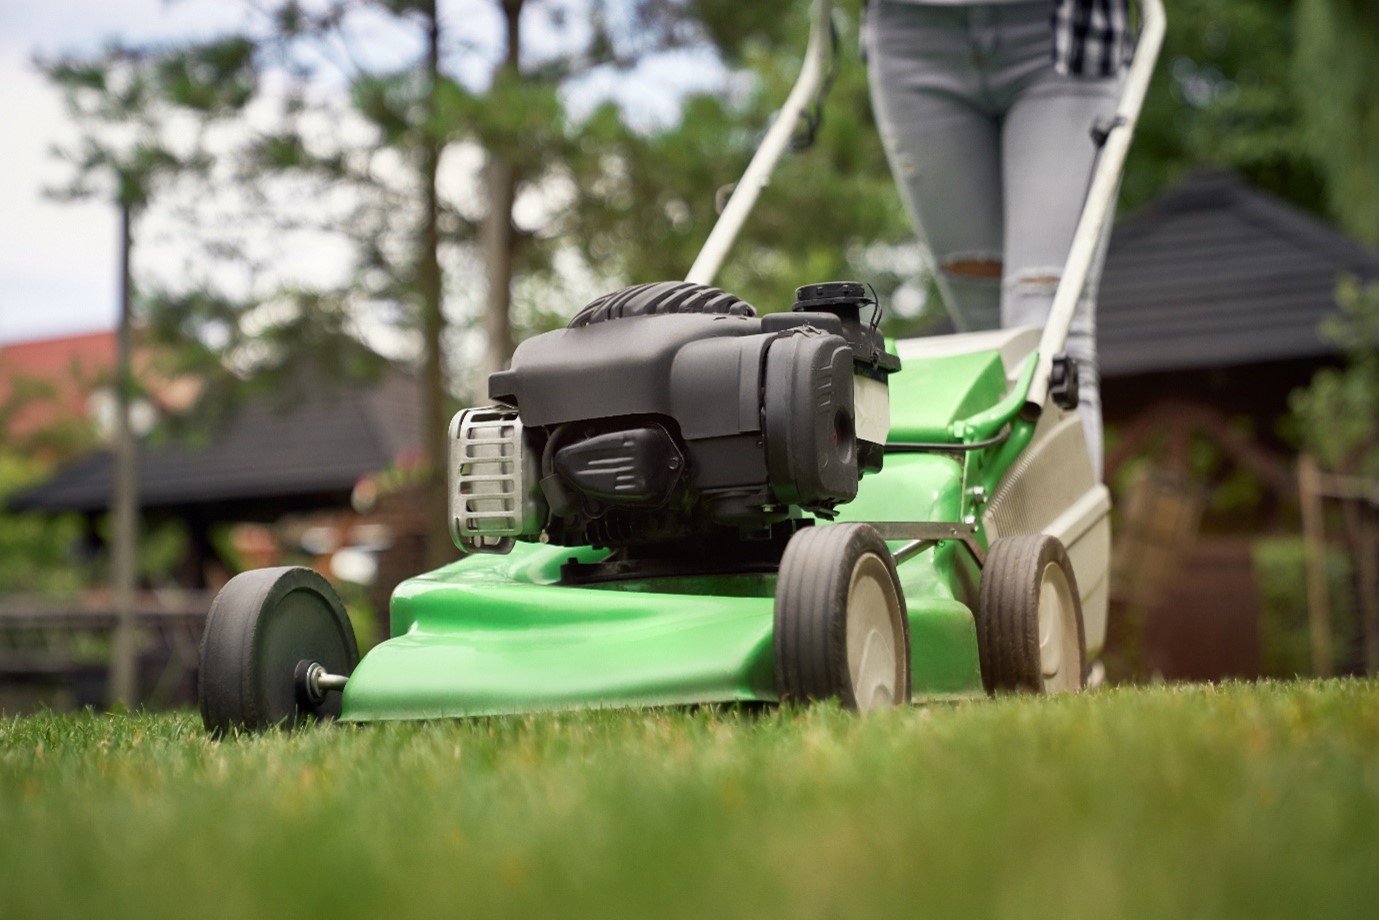 Lawn Mowing Machines